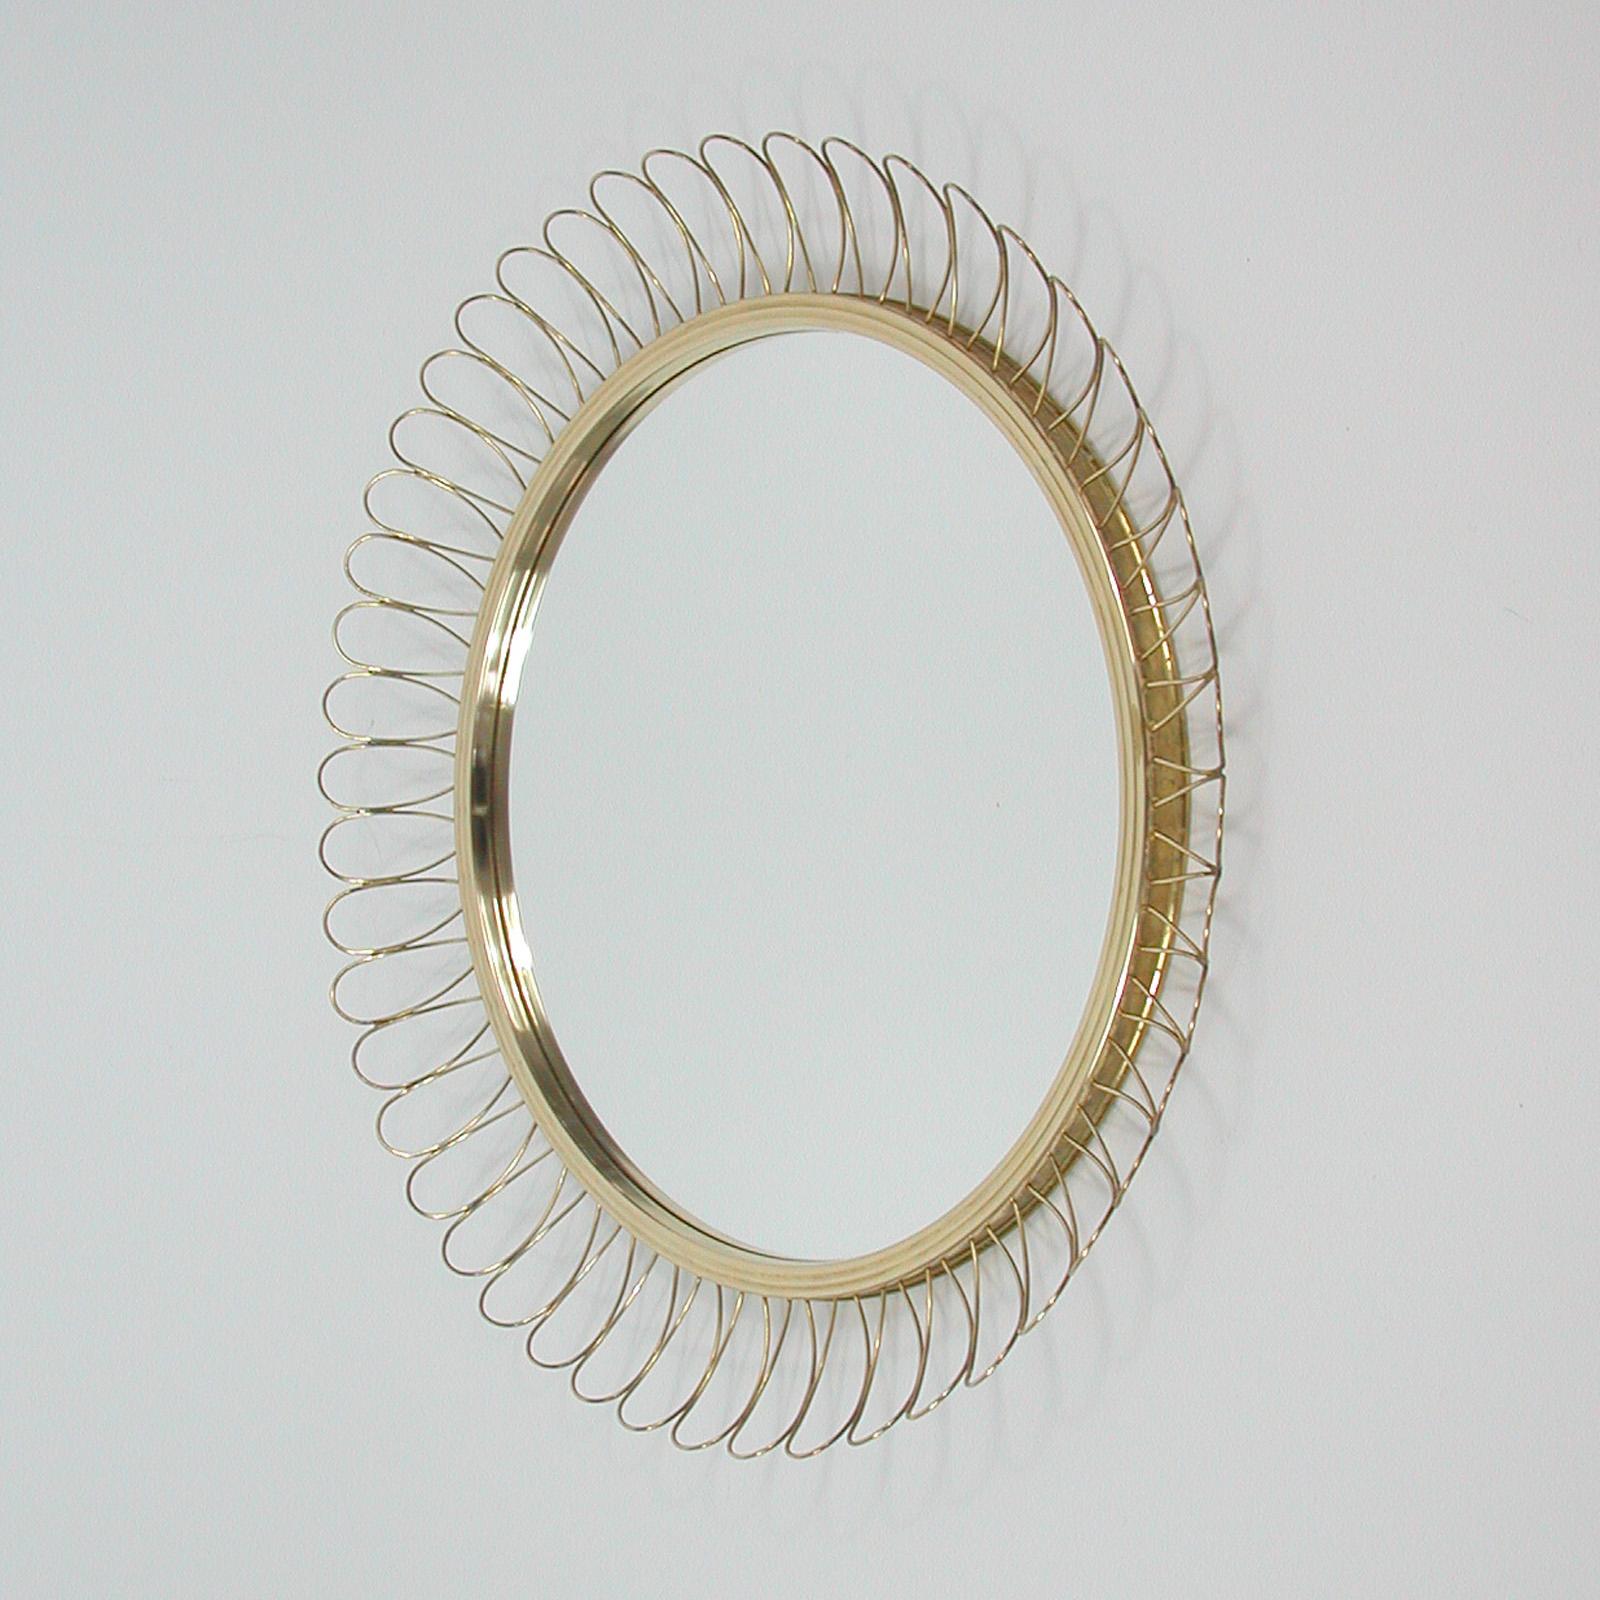 Plated Midcentury Sculptural Round Brass Wall Mirror, Sweden 1950s For Sale